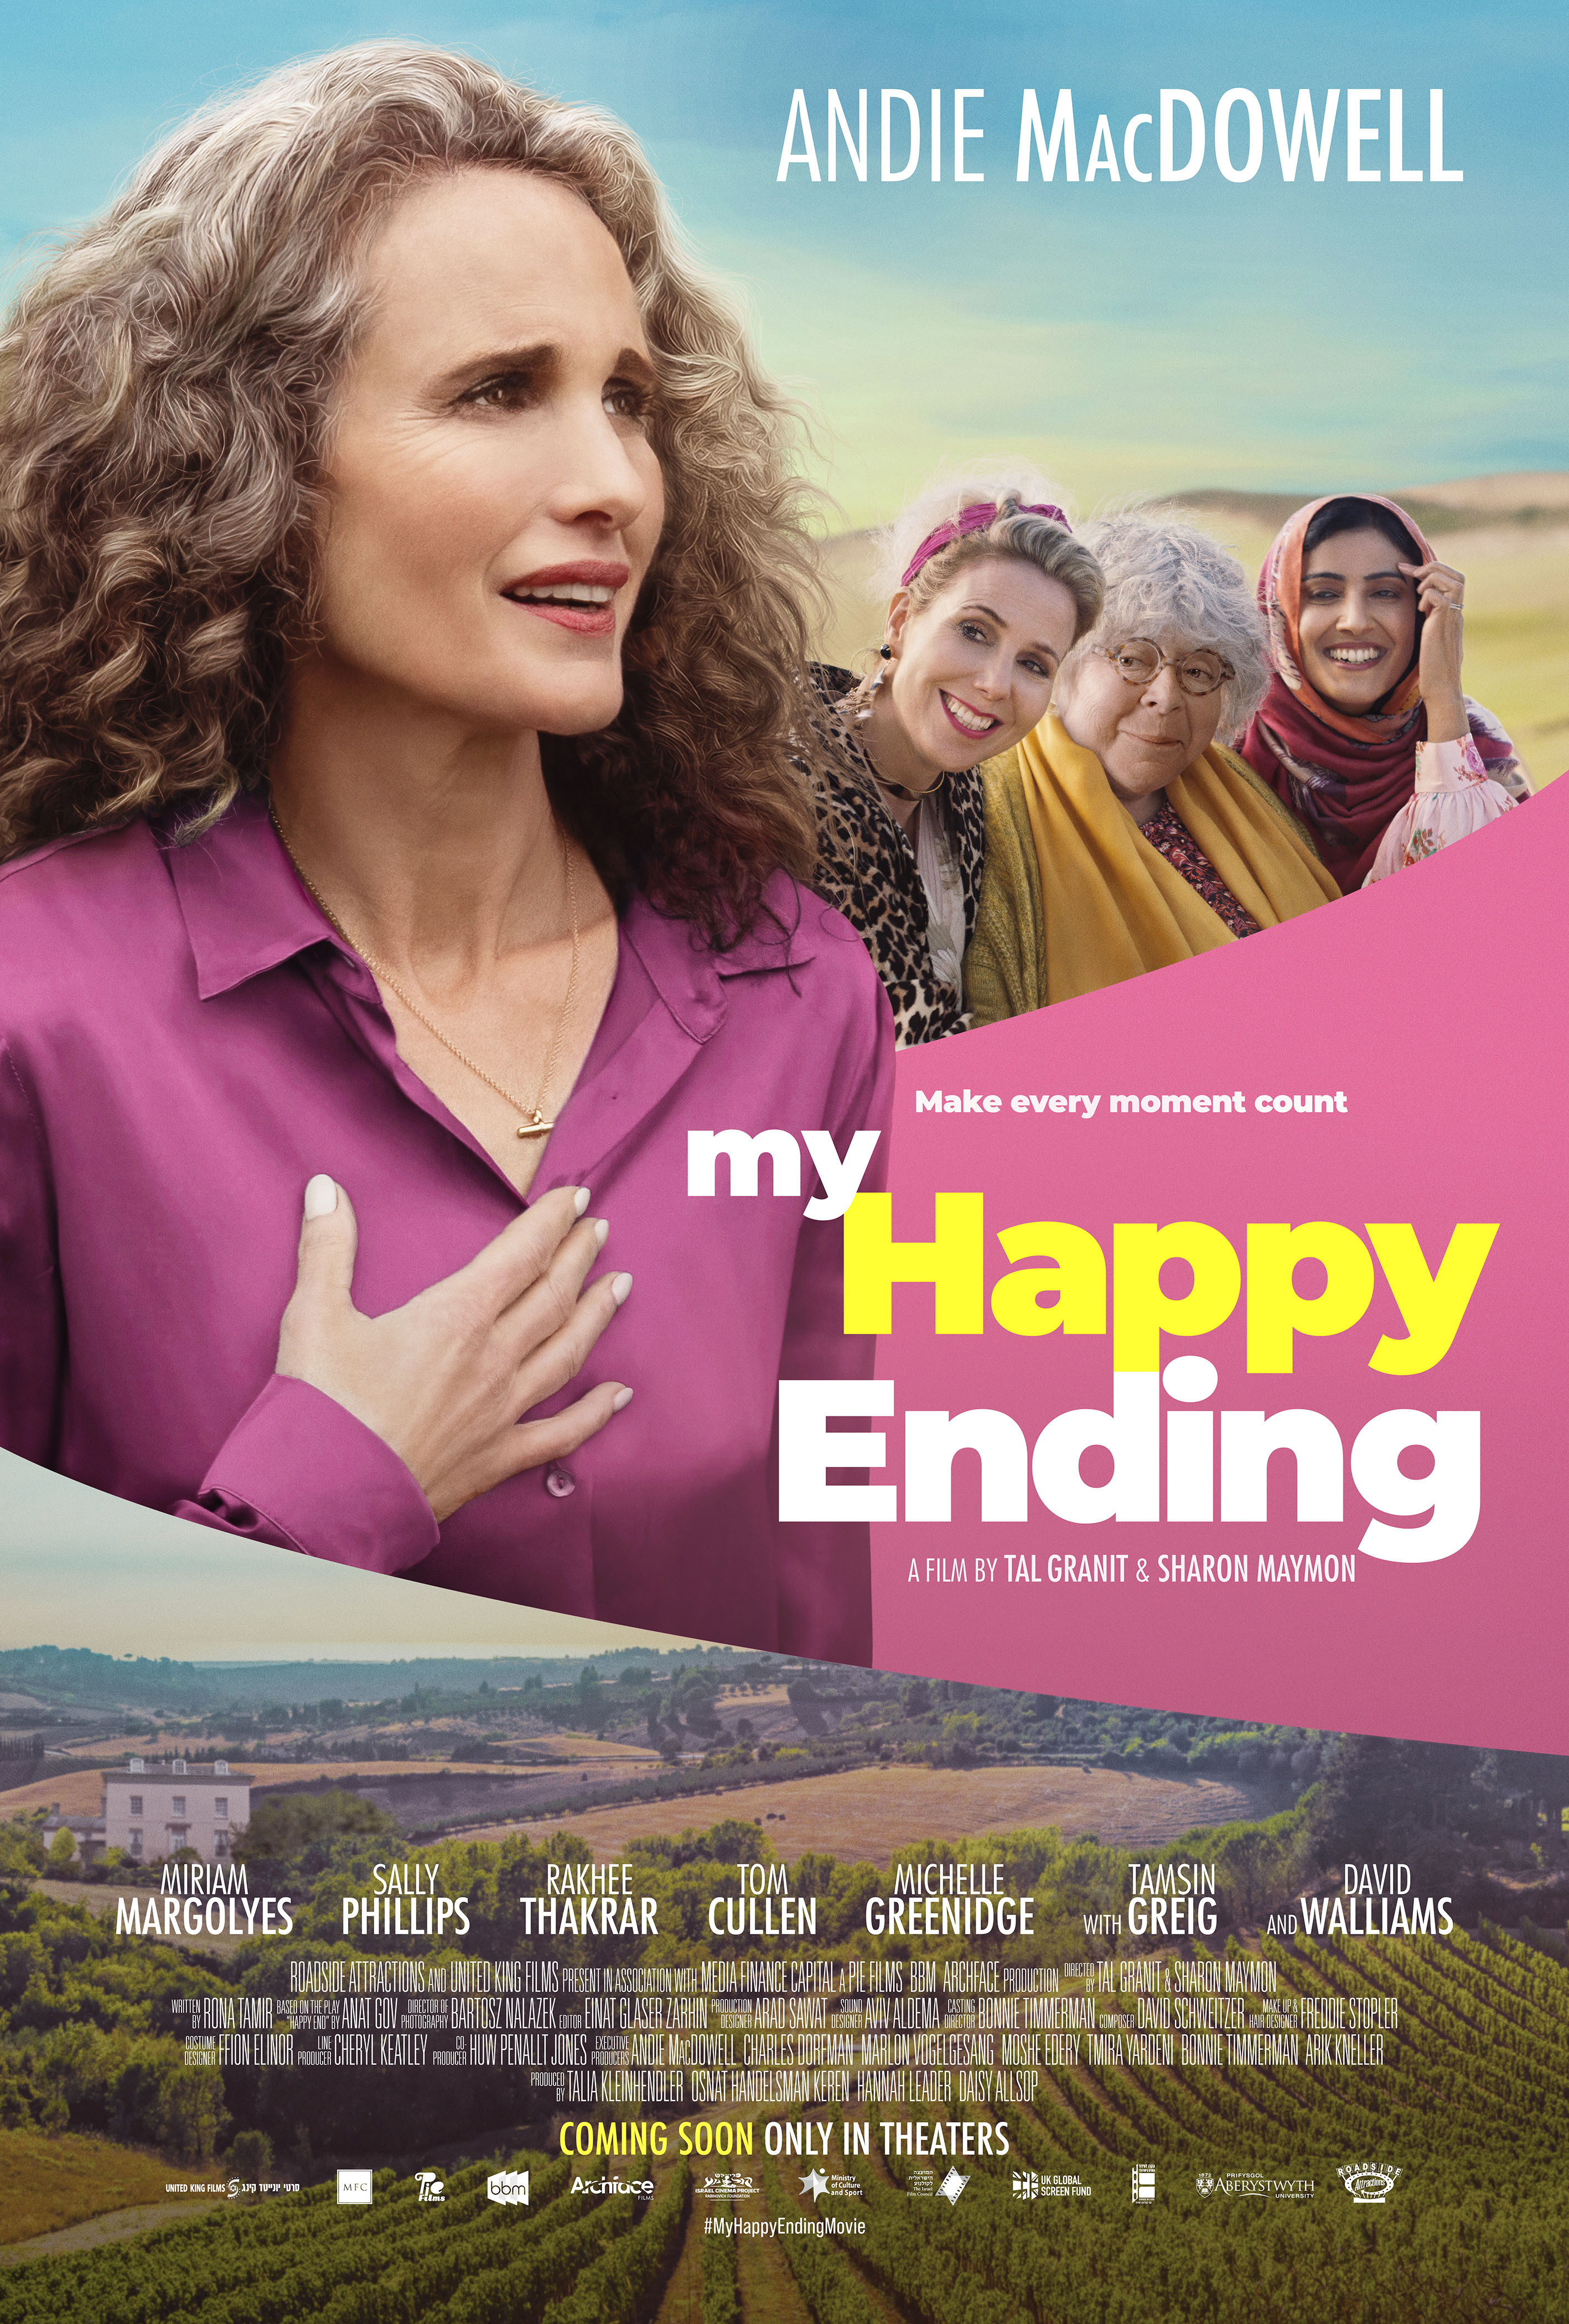 Cover Art for "My Happy Ending"